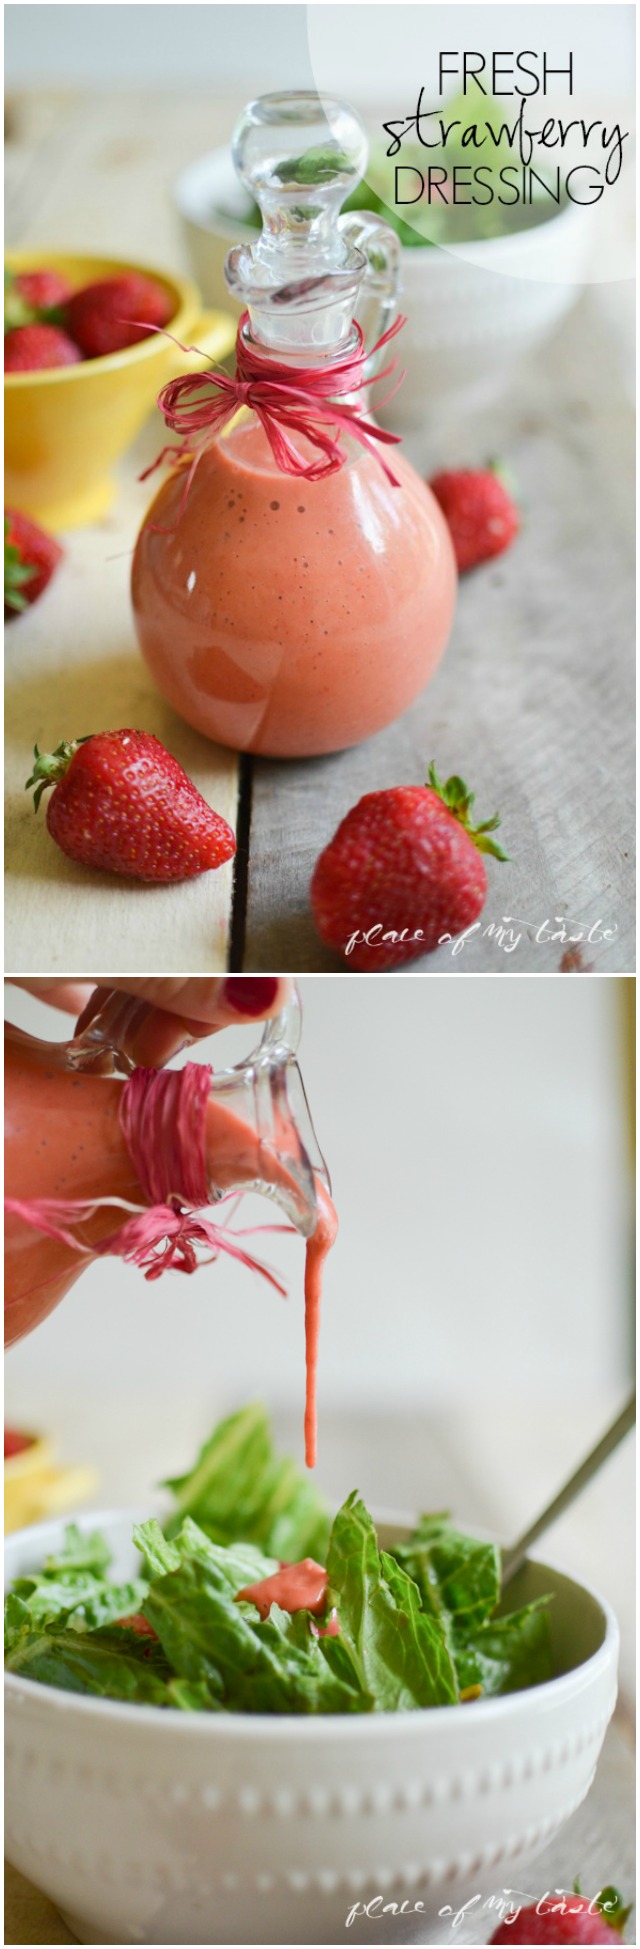 FRESH STRAWBERRY DRESSING - This is the best dressing ever! So GOOD! 